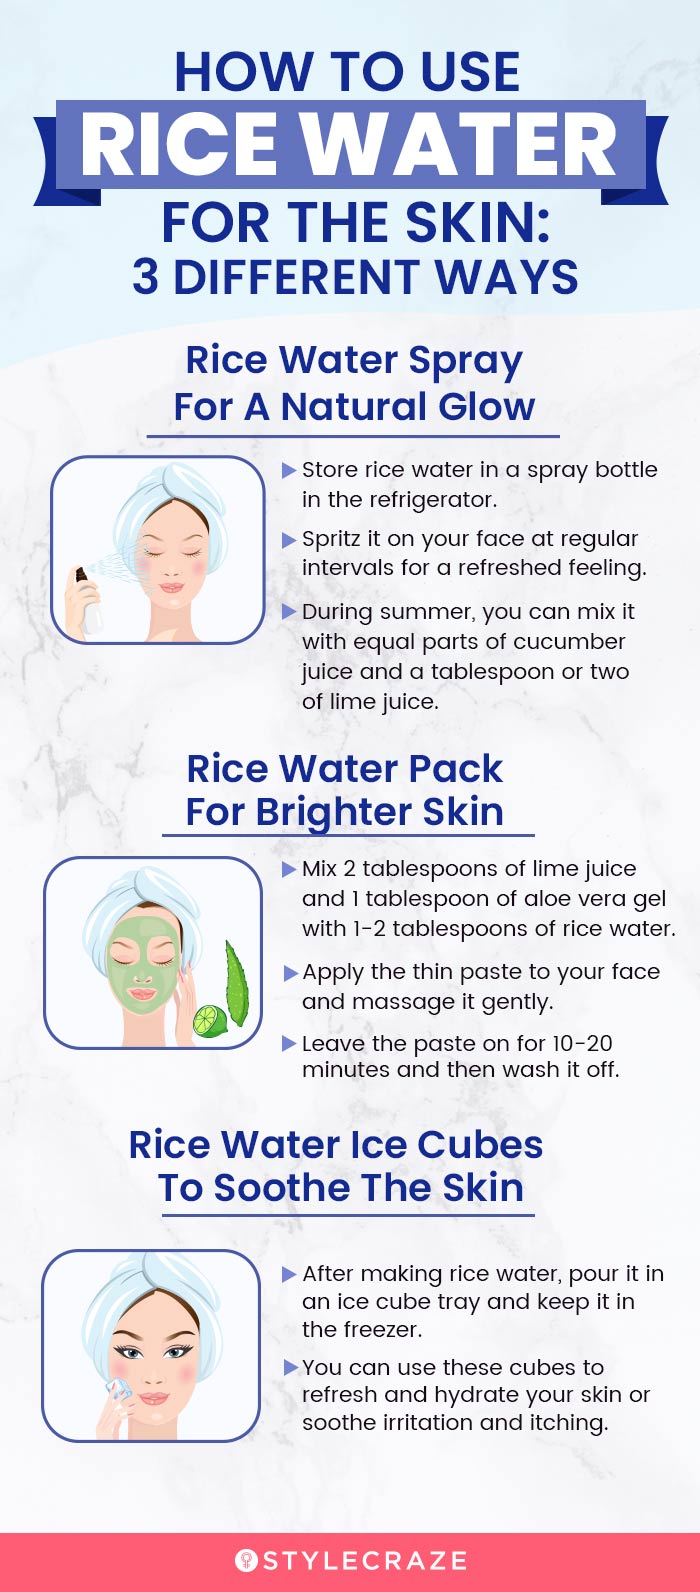 how to use rice water for skin [infographic]